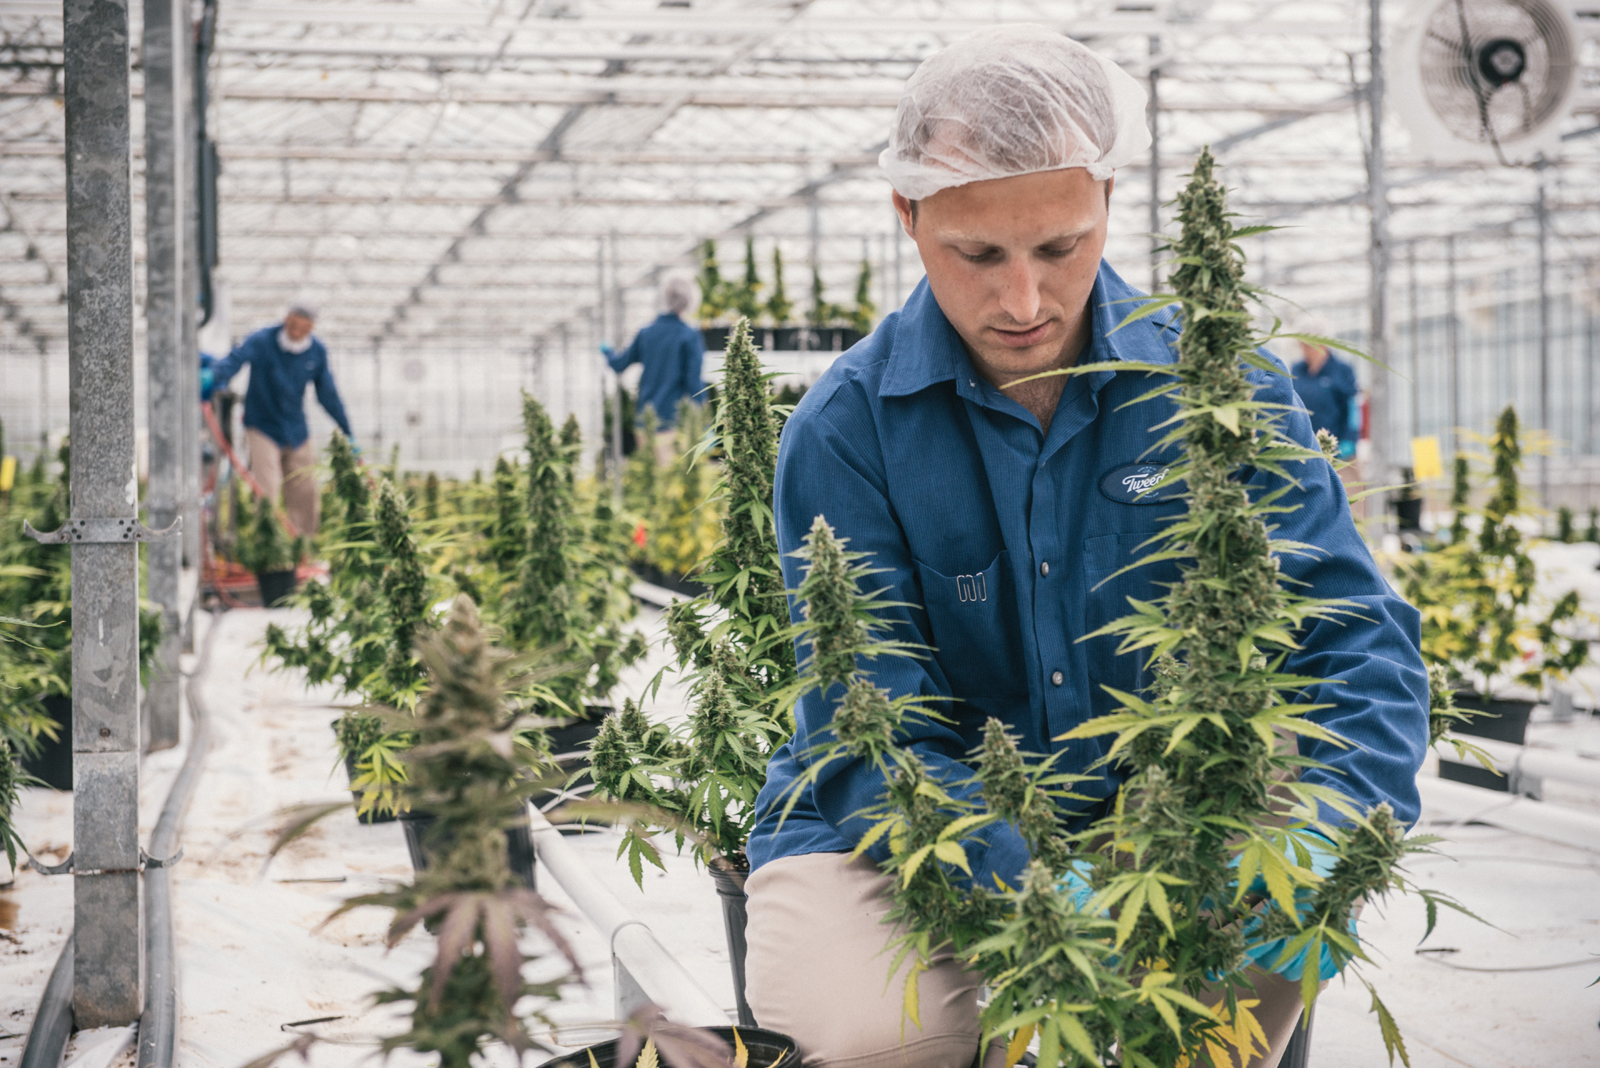 Operator of world’s largest grow facility expanding to over one million square feet